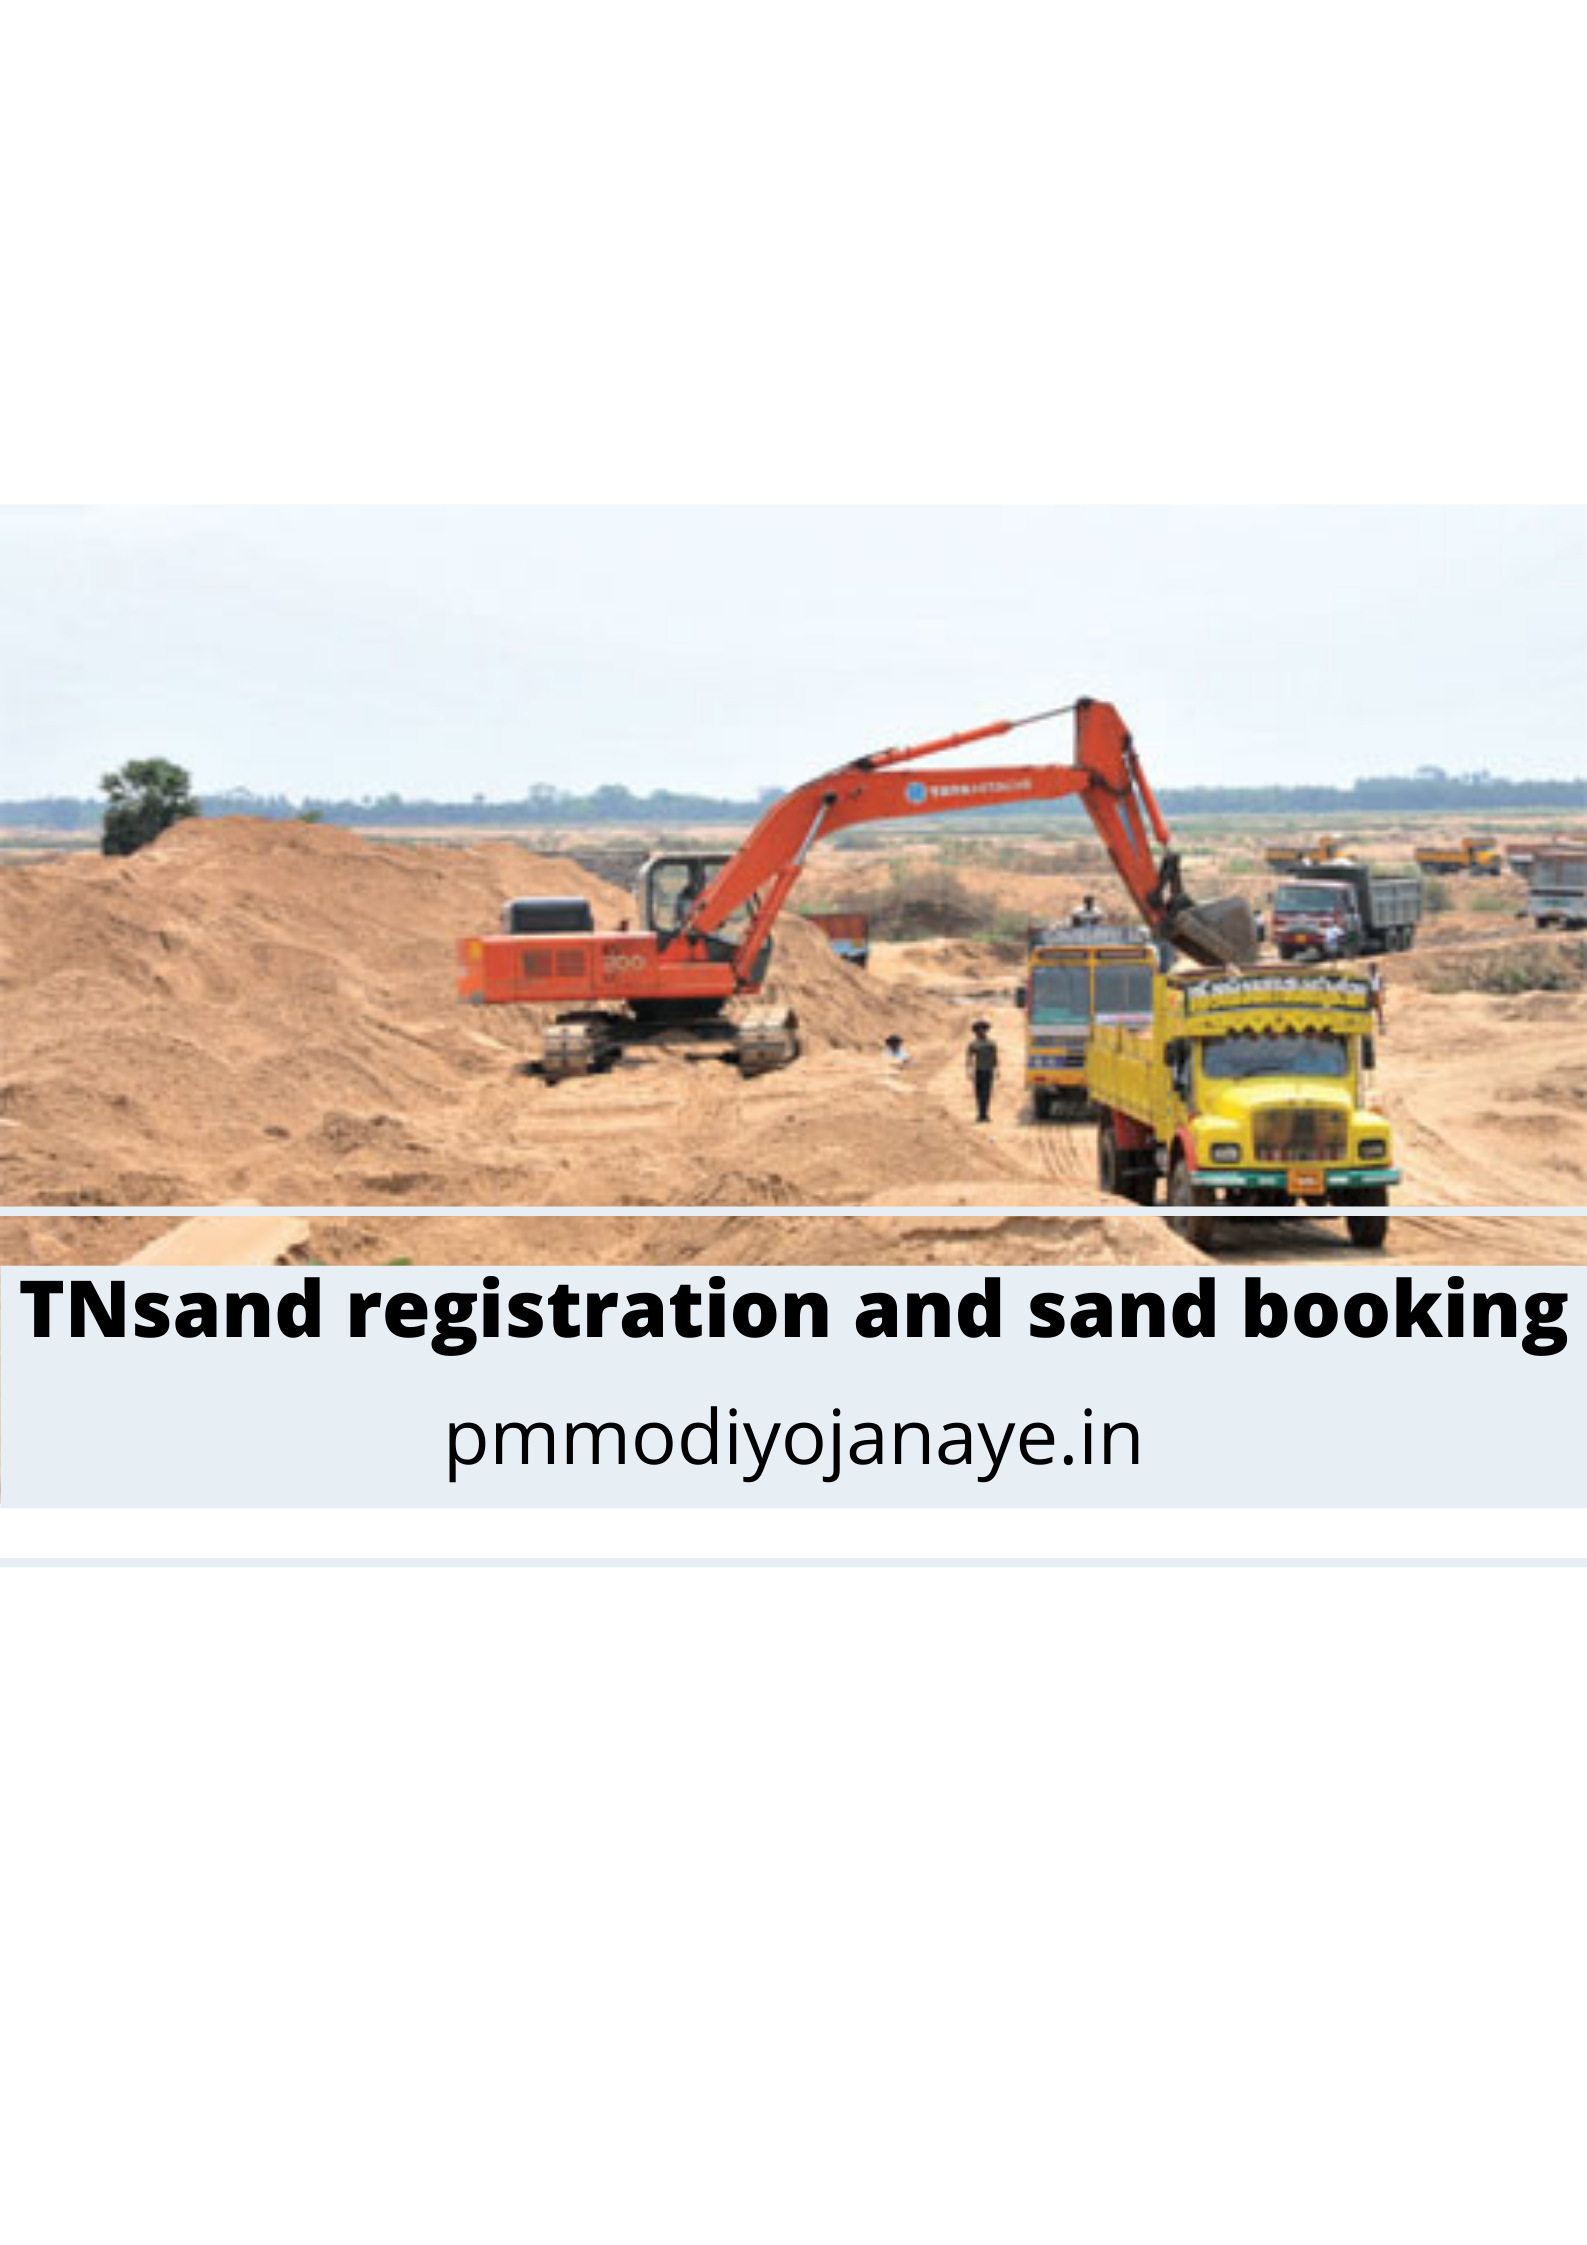 TNsand-registration-and-sand-booking